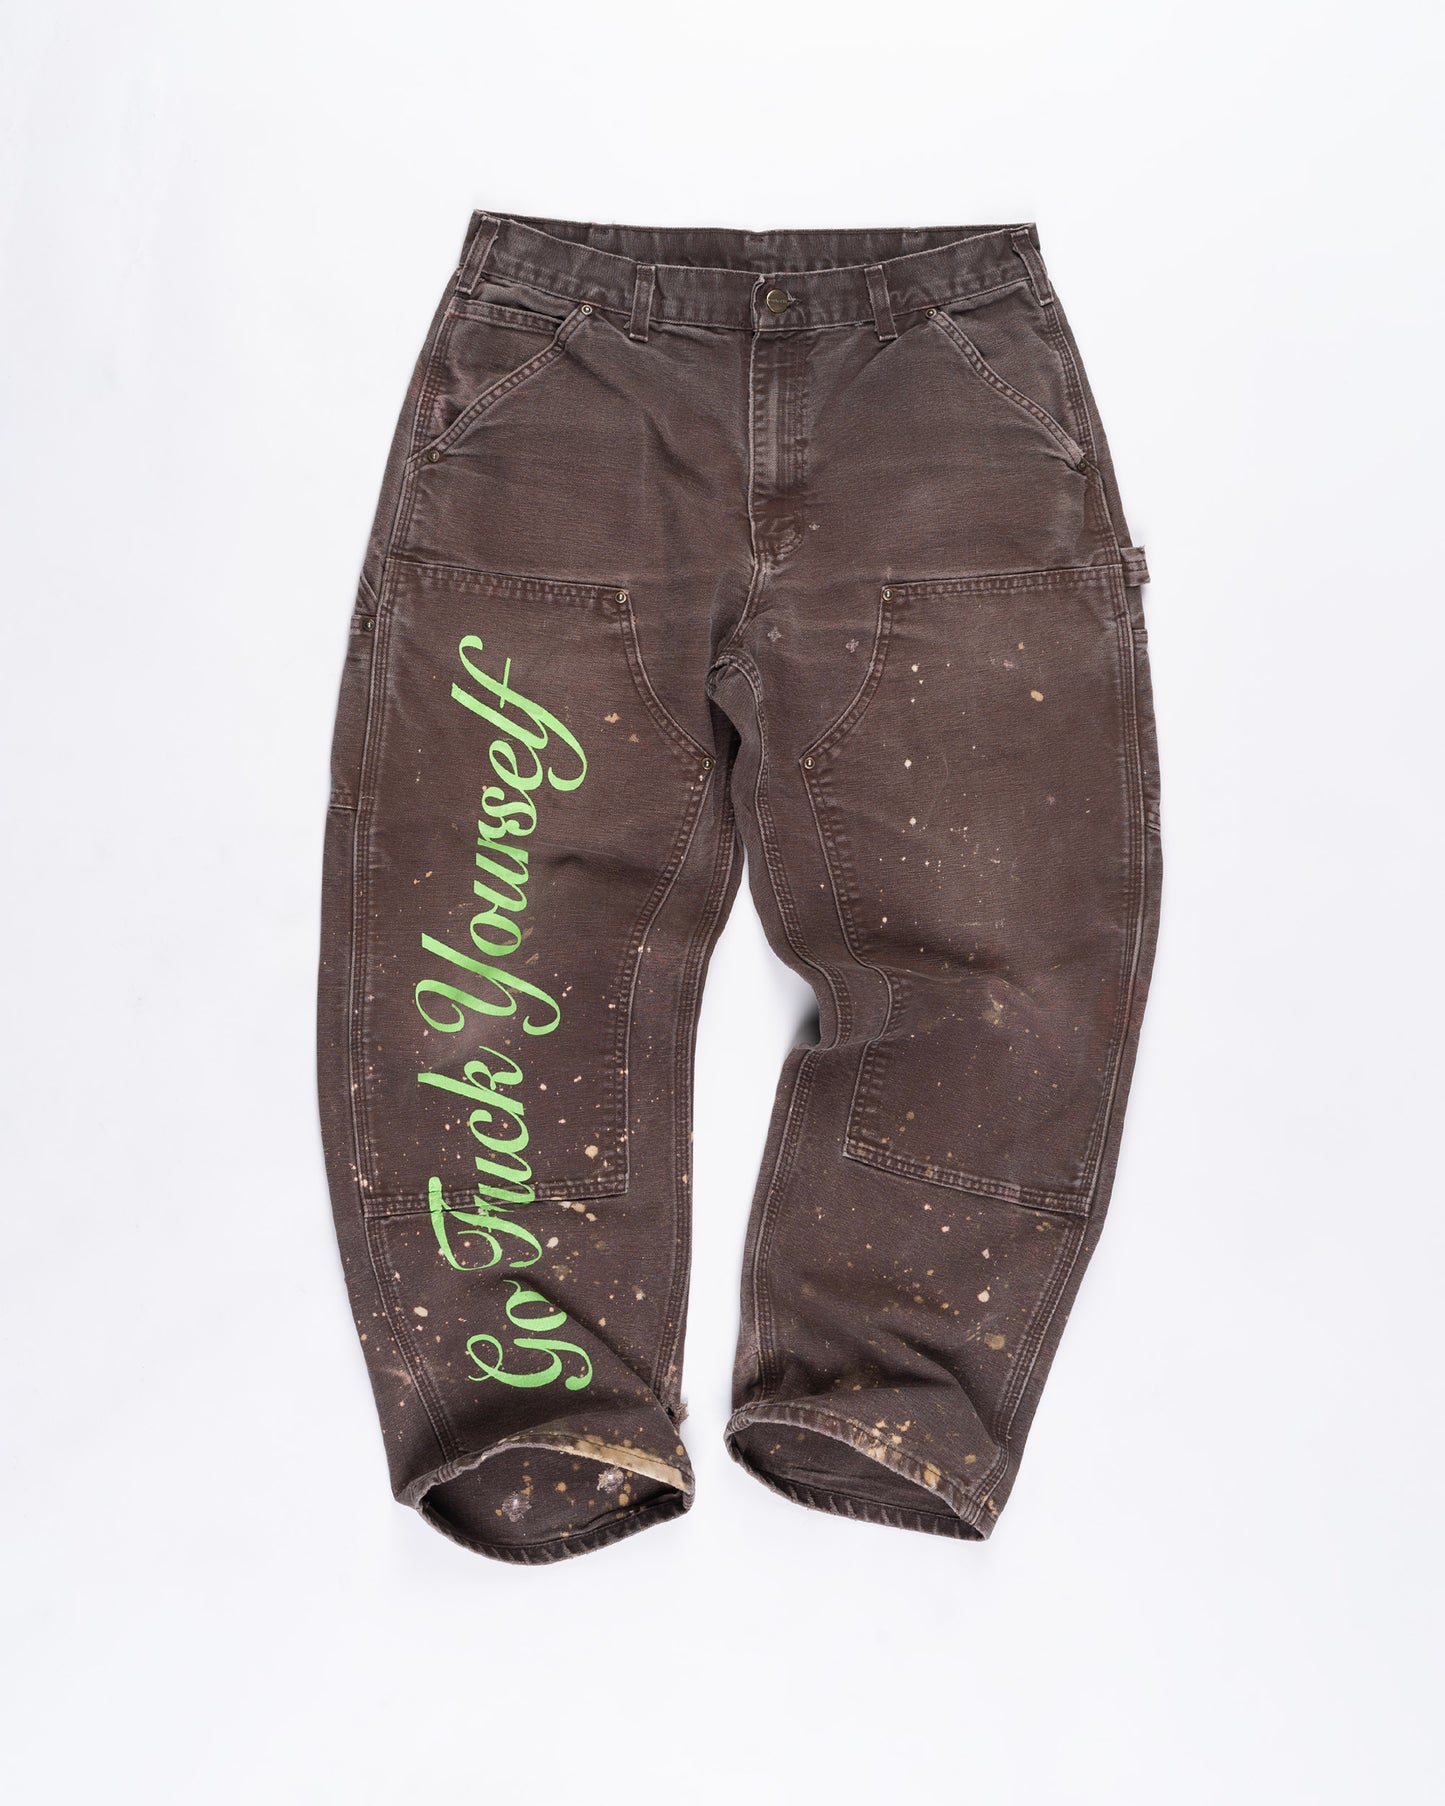 Brown Carhart Cargo Pants Size: 34